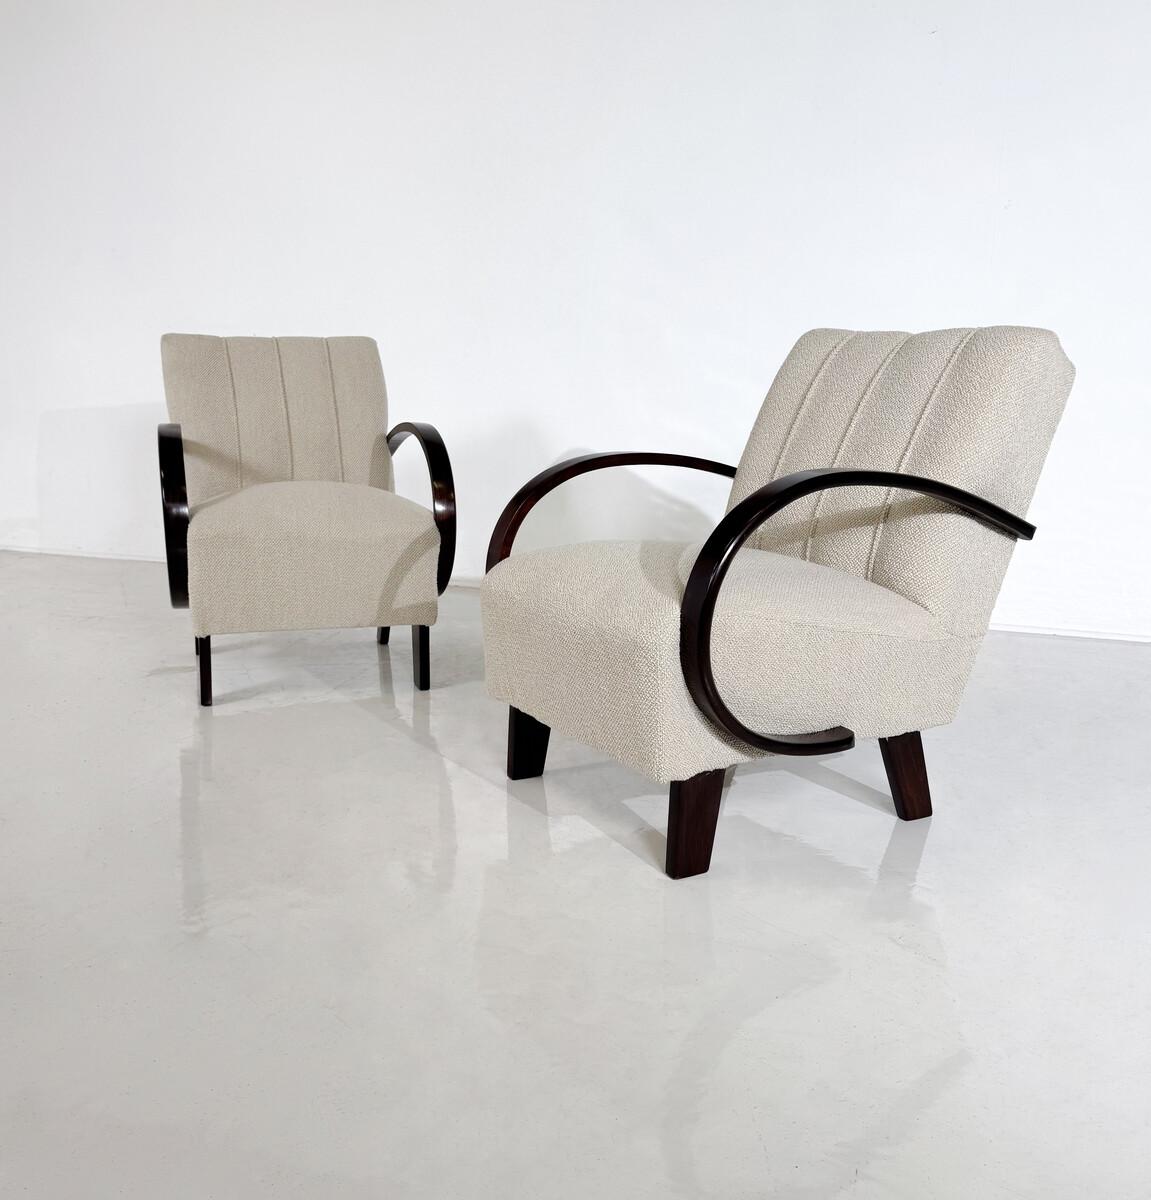 Pair of Bentwood Armchairs by Jindrich Halabala - Czech Republic 1940s For Sale 1